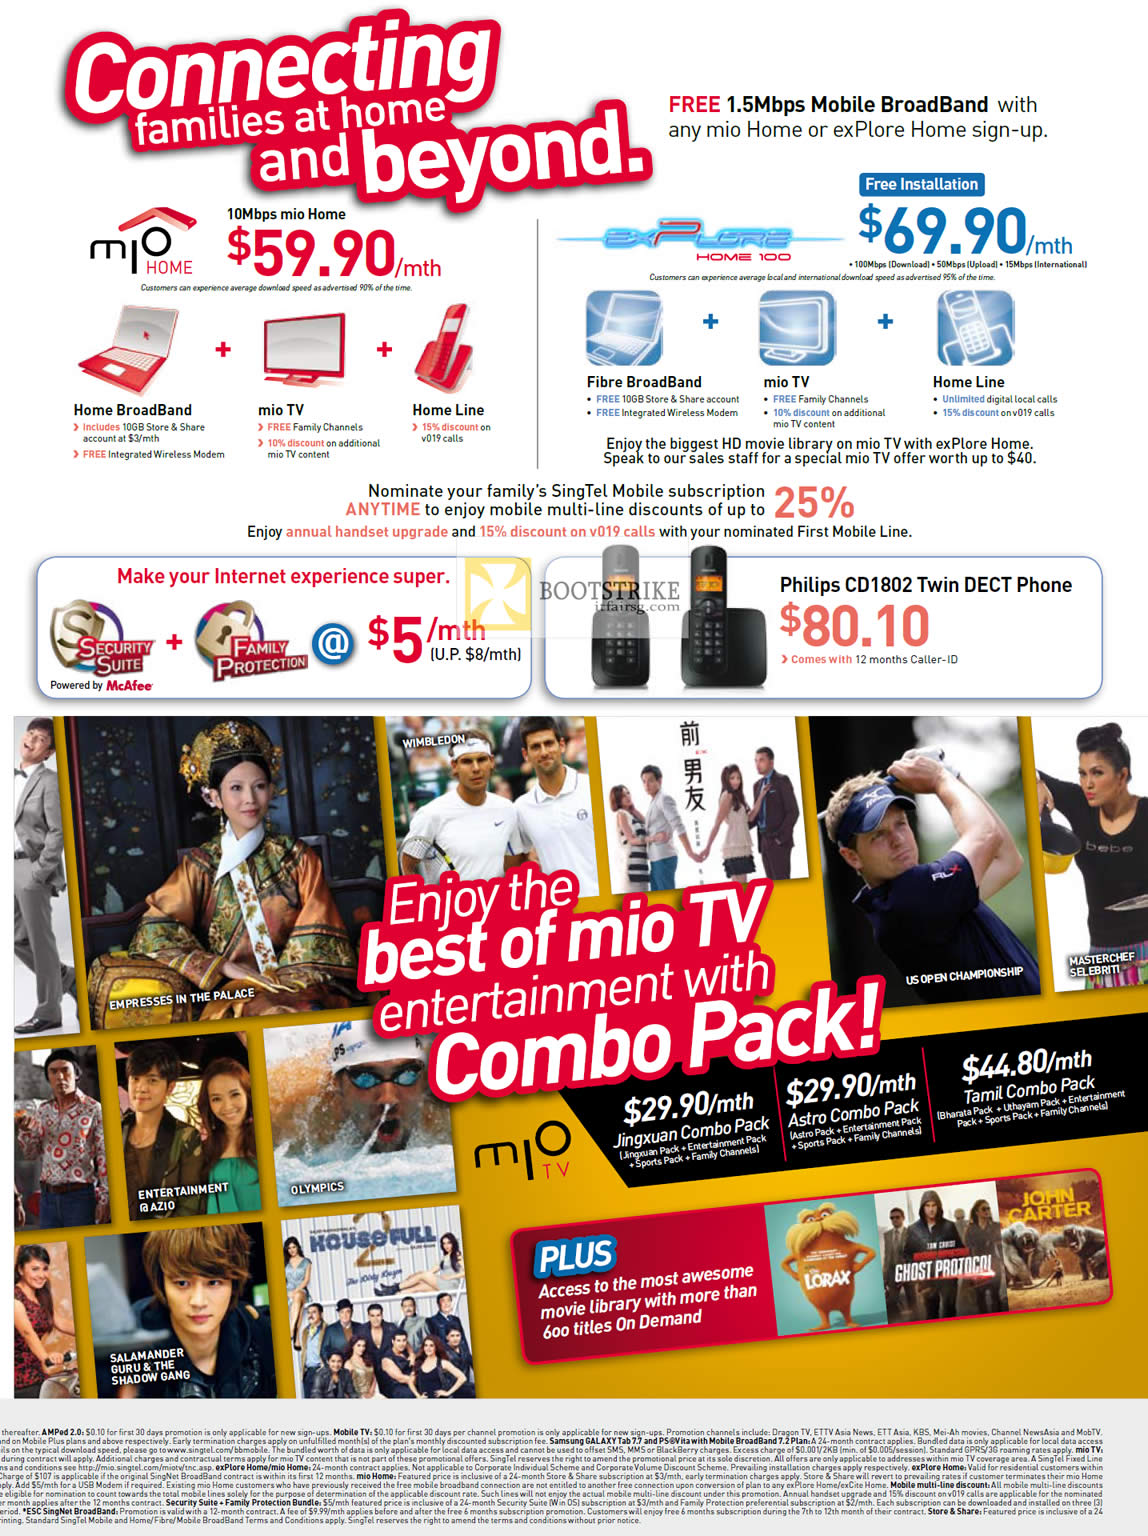 PC SHOW 2012 price list image brochure of Singtel TV Mio TV, Mio Home, Explore Home 100, Philips CD1802 Dect Phone, Combo Pack